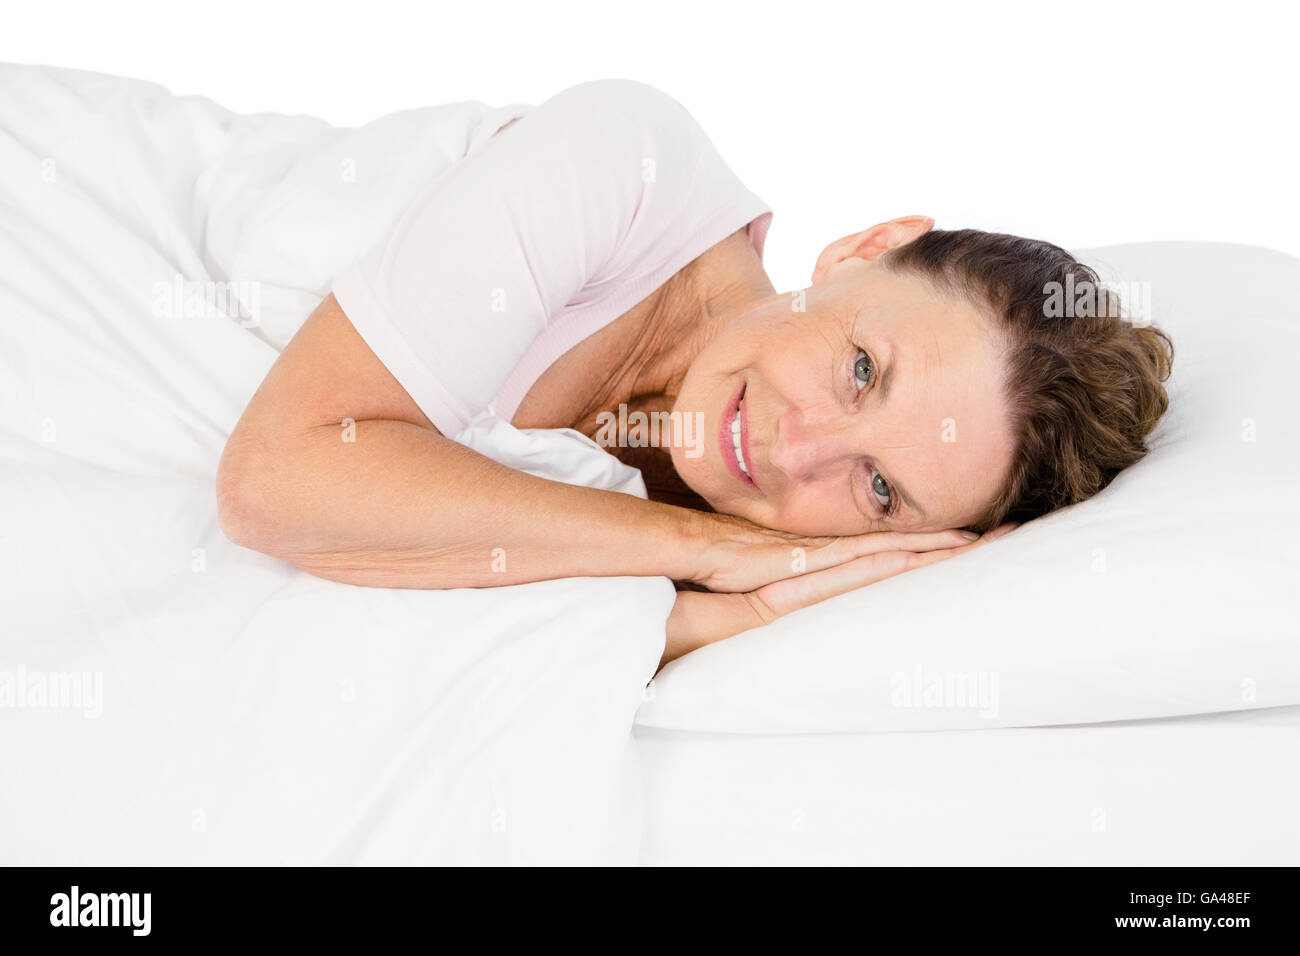 Portrait of smiling mature woman lying on bed Stock Photo